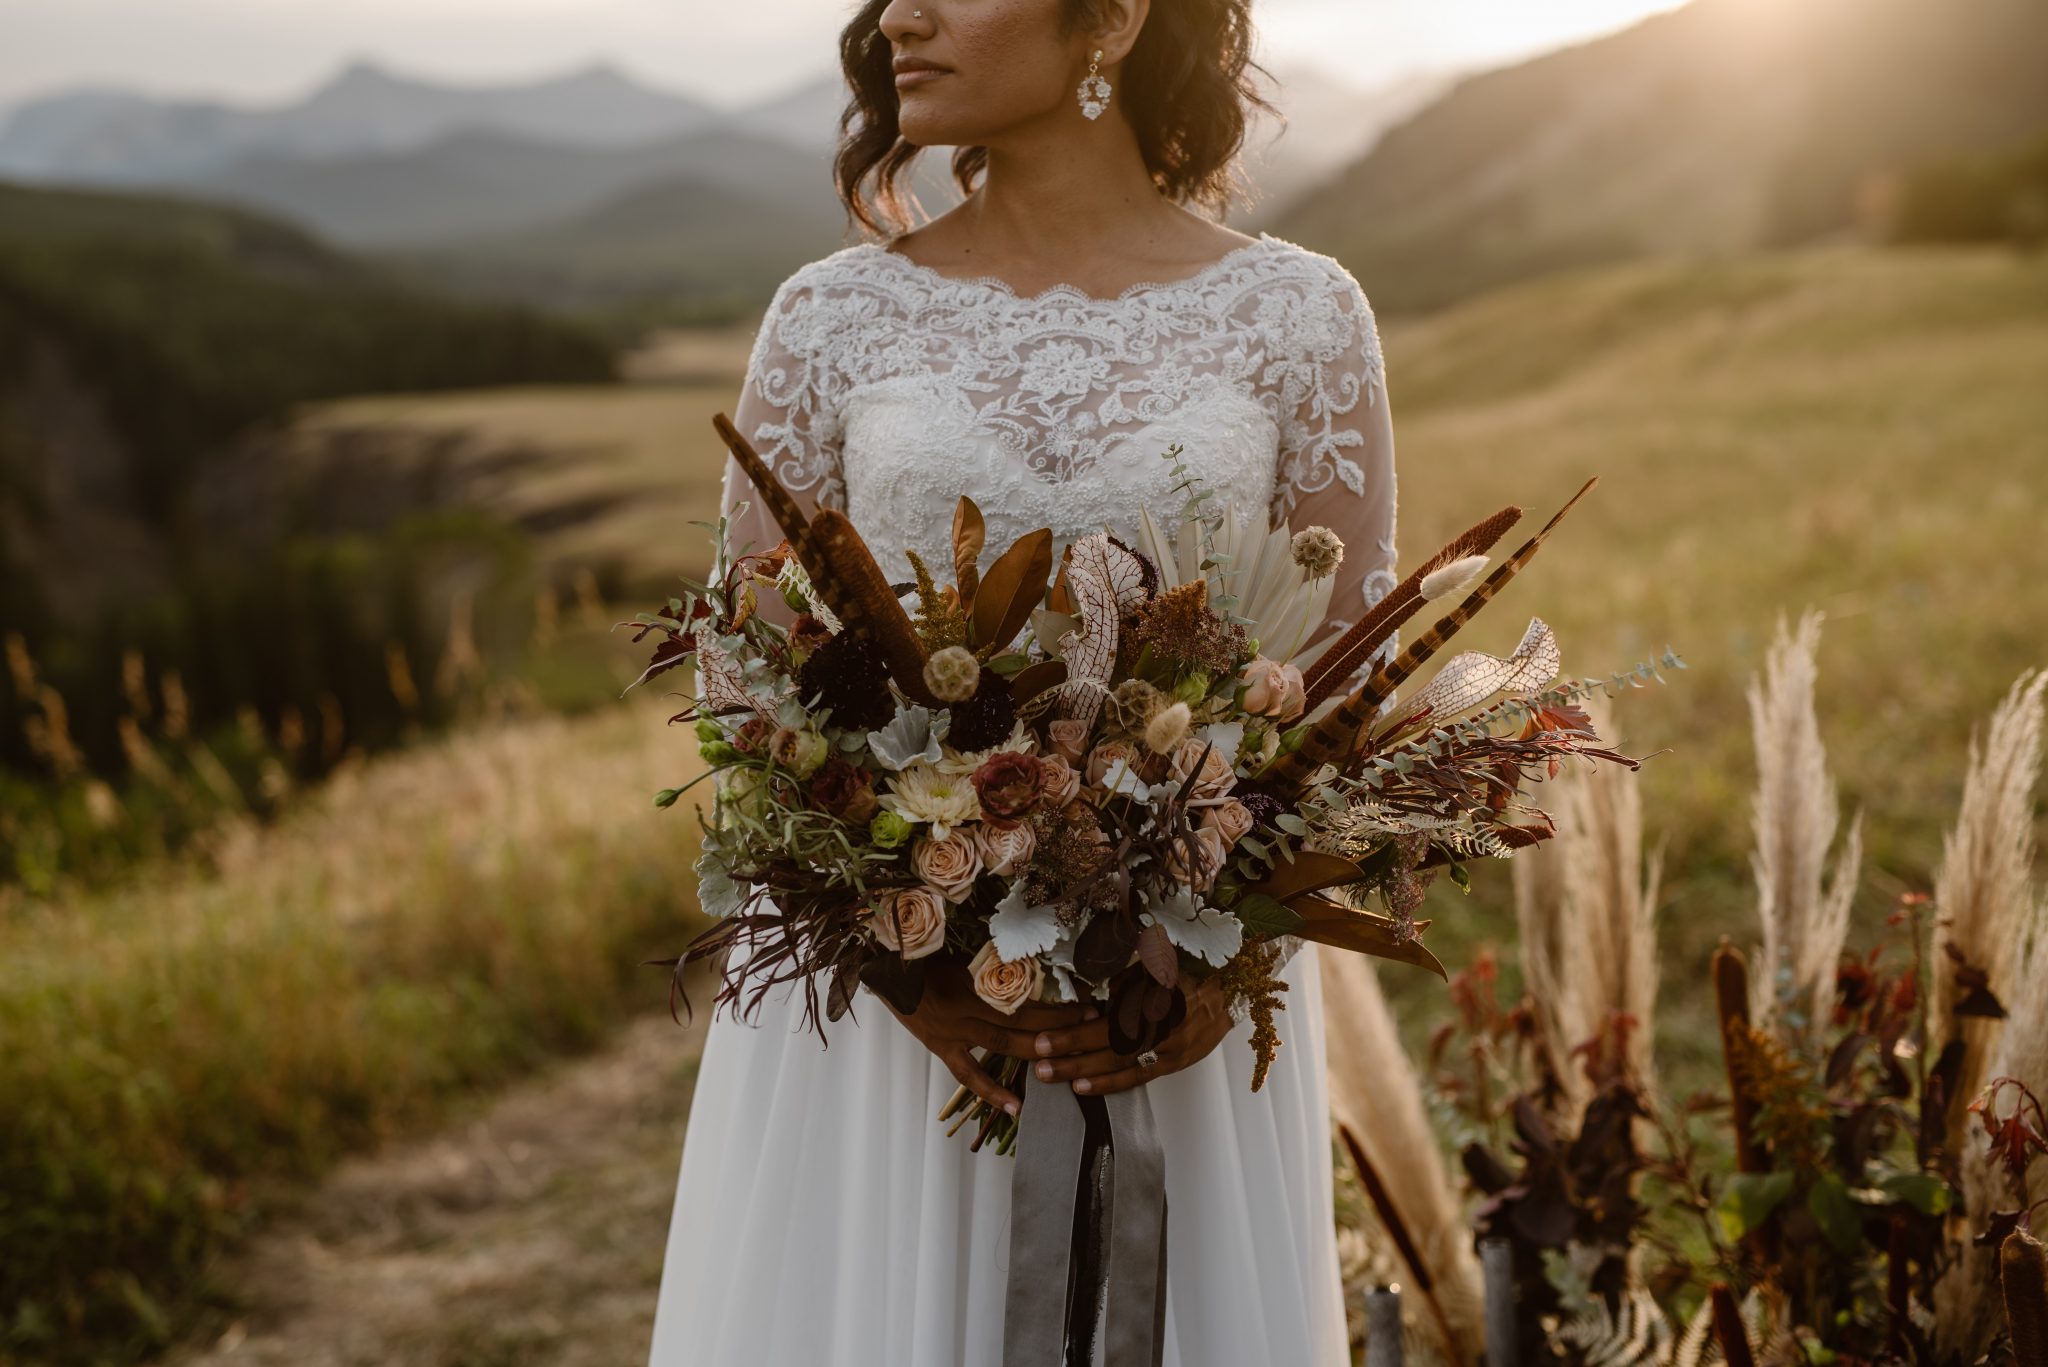 Earthy and Eclectic Moroccan Elopement at Big Horn Lookout featured on Brontë Bride - eclectic elopement, dried florals, mountain elopement